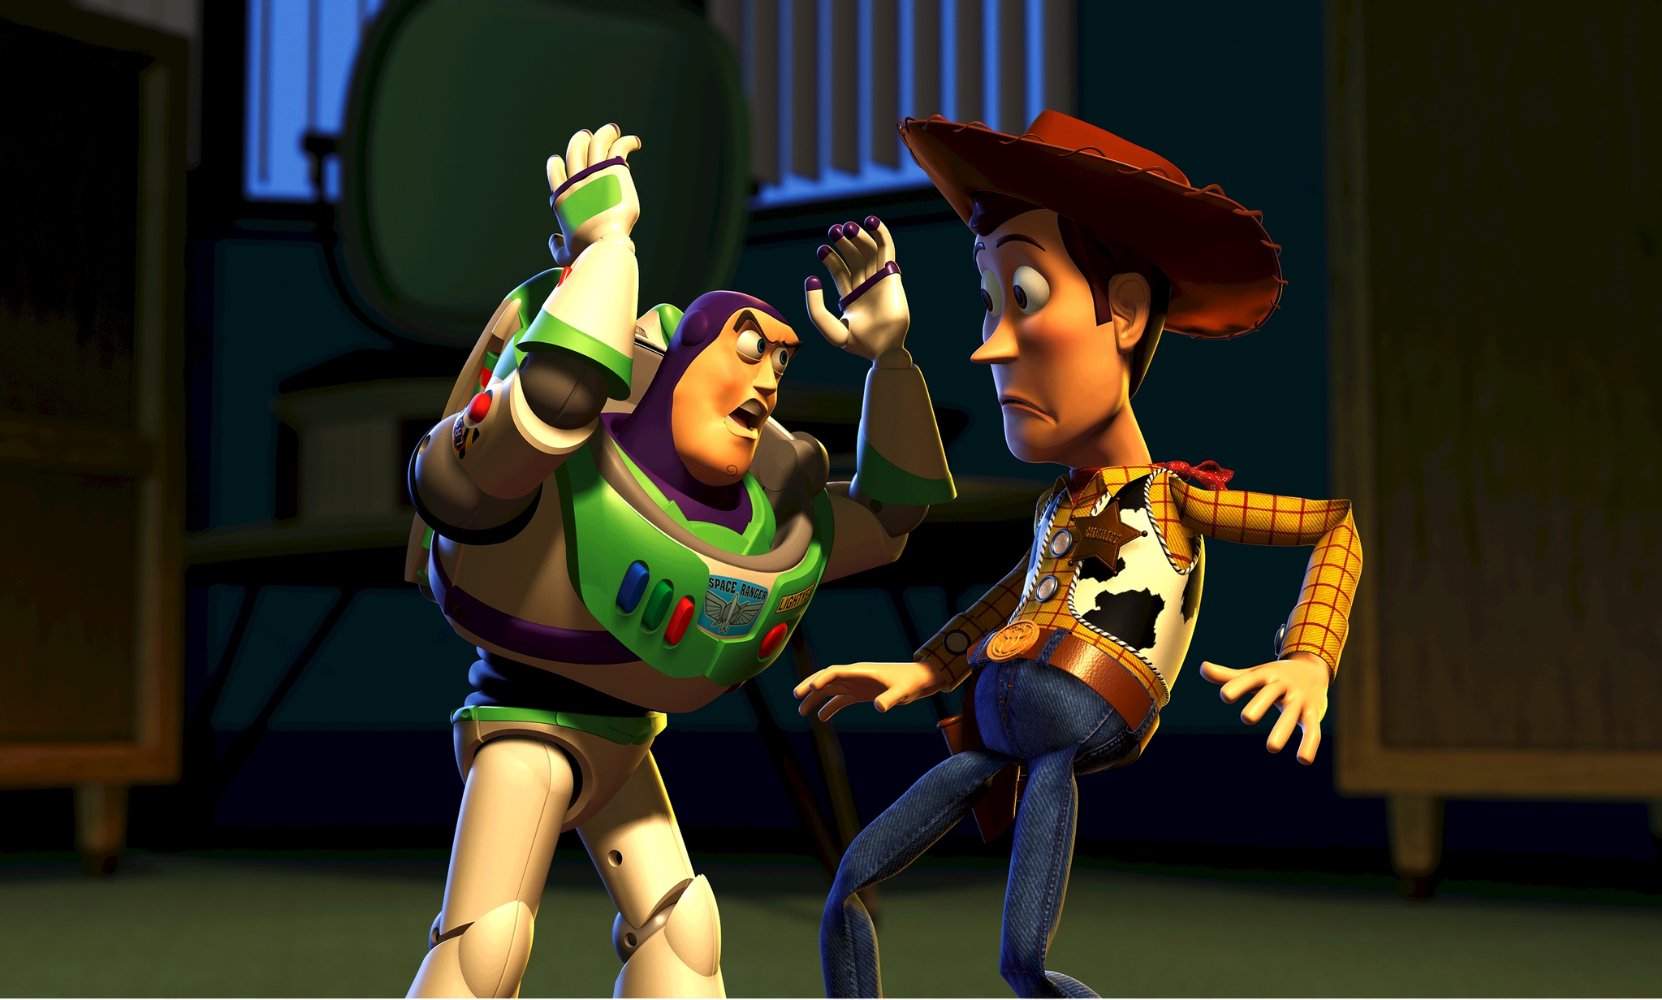 download toy story 2 full movie online